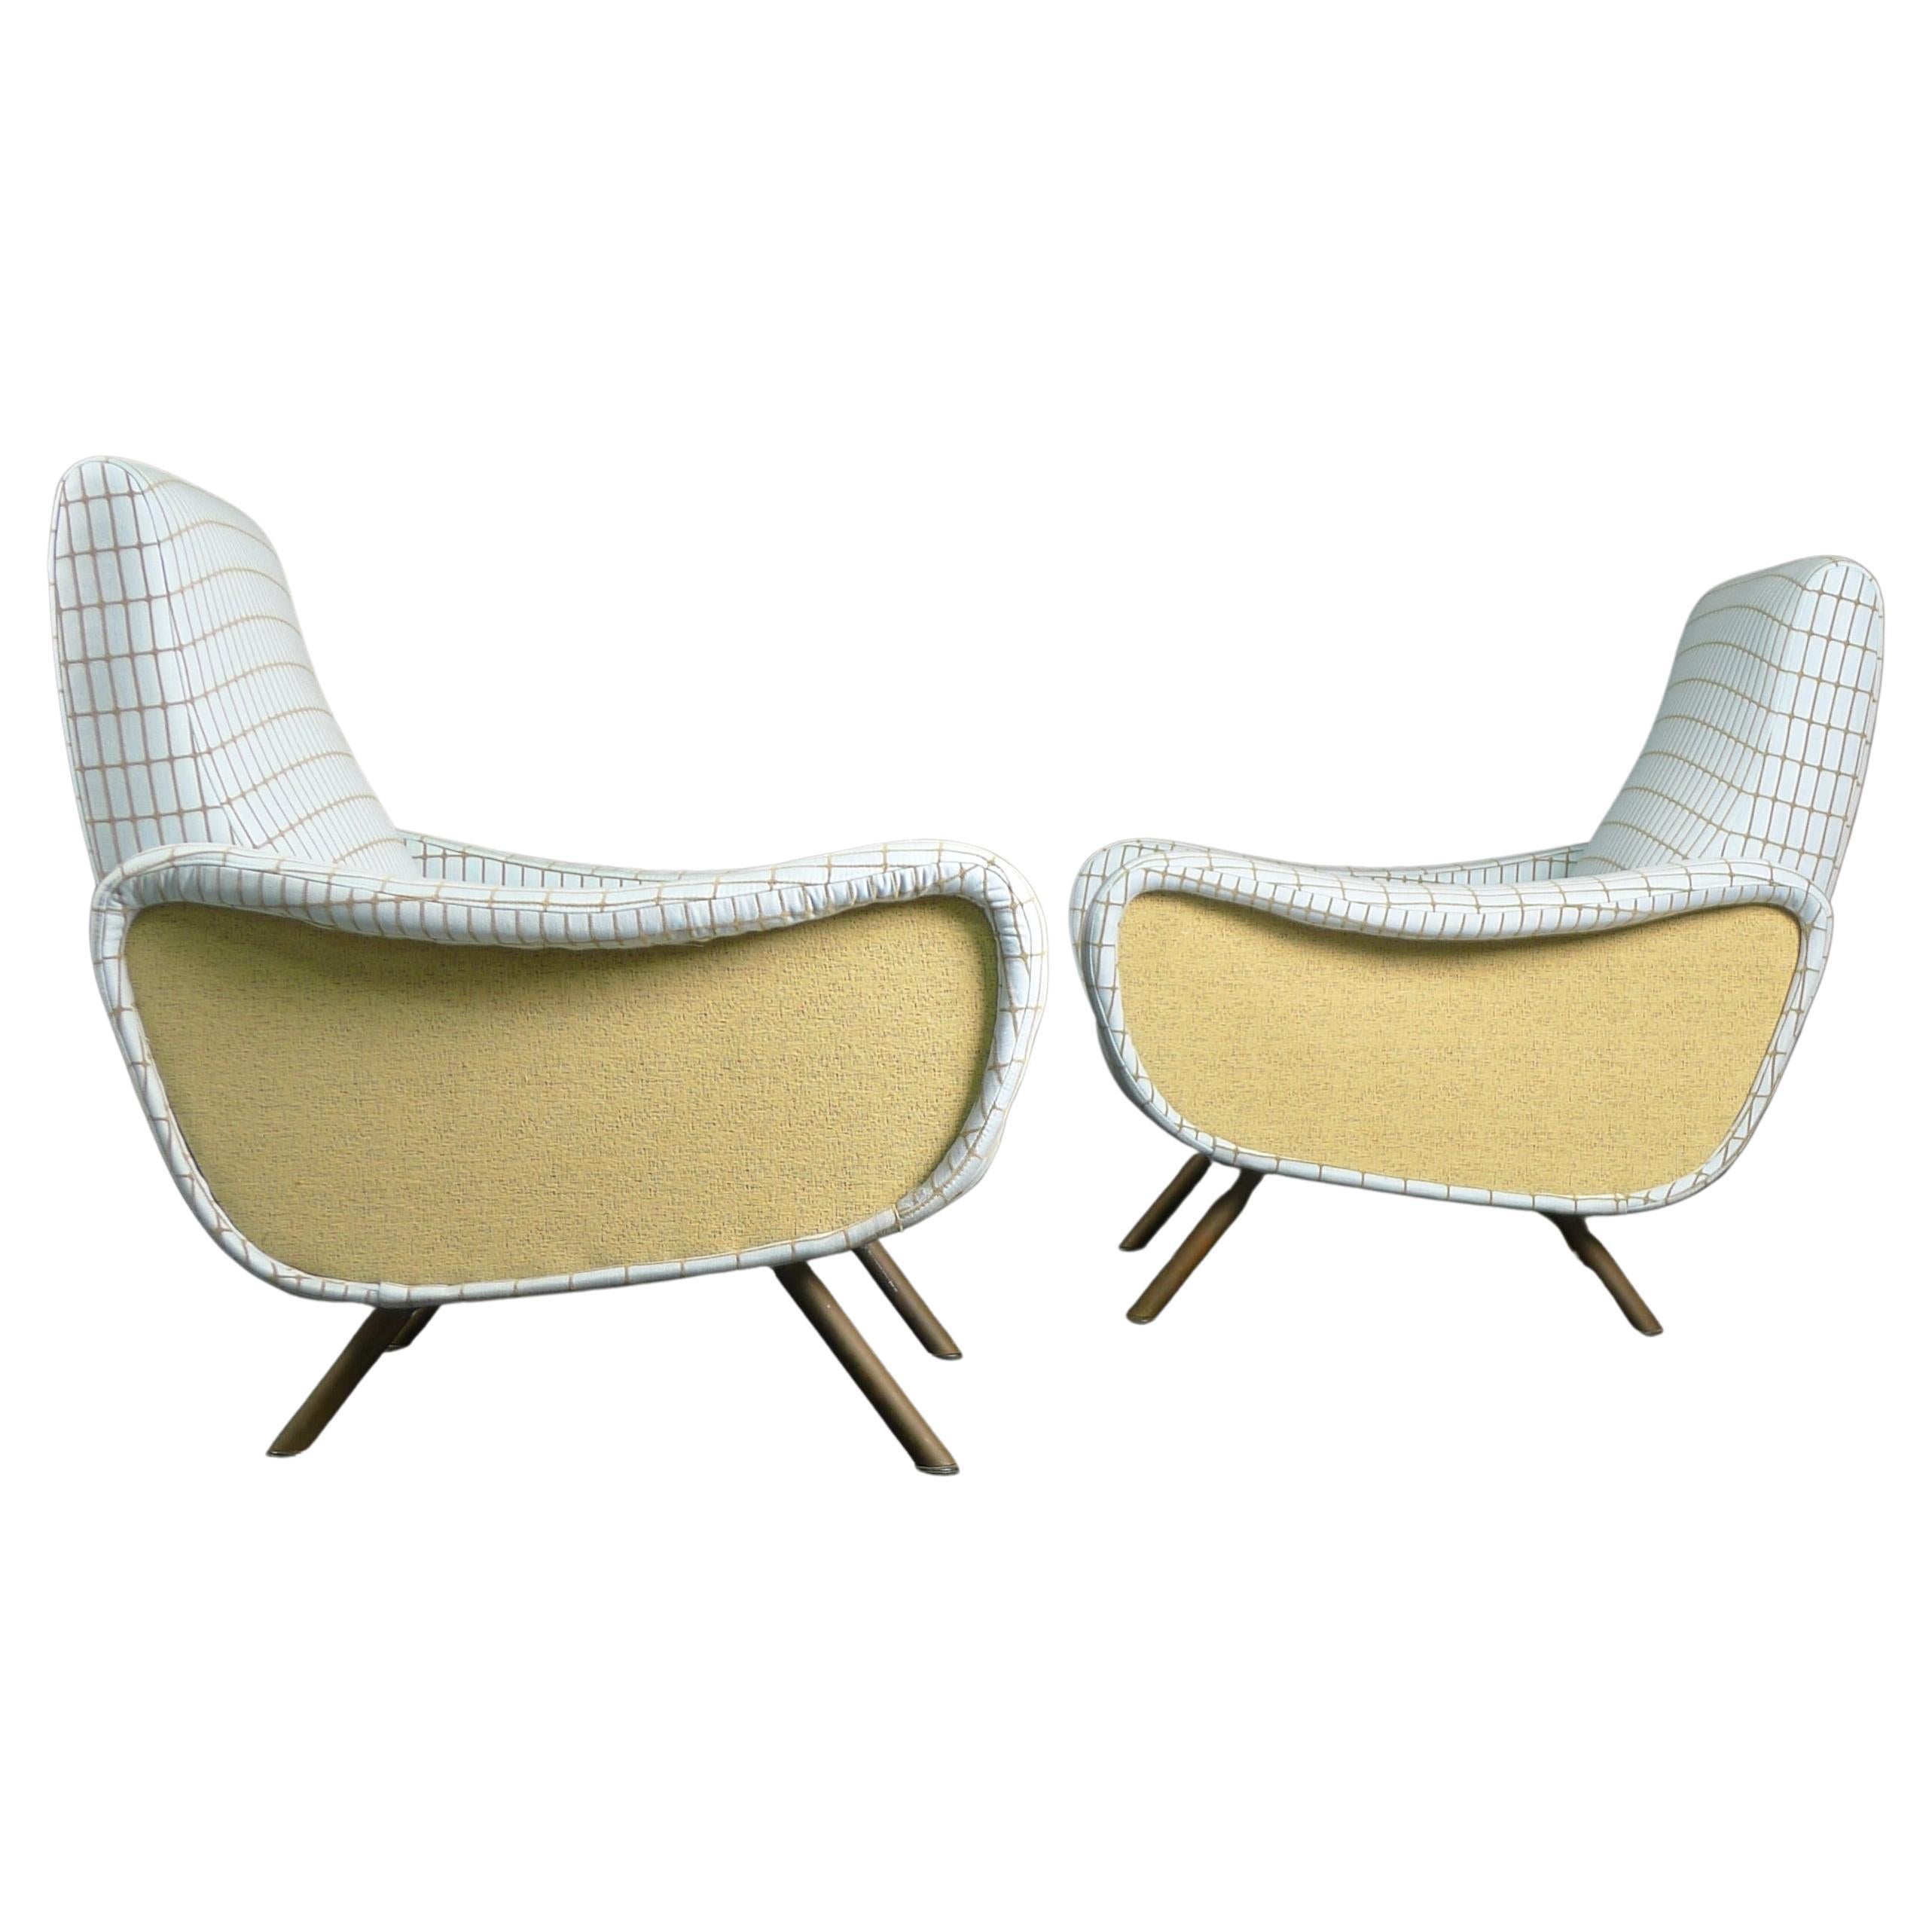 Marco Zanuso, Pair of Lady Chairs, manufactured by Arflex, Italy, mid 1950s

This midcentury Classic design was awarded the Gold Medal in the 1951 Milan Triennale. 

Reupholstered in Svensson fabric.